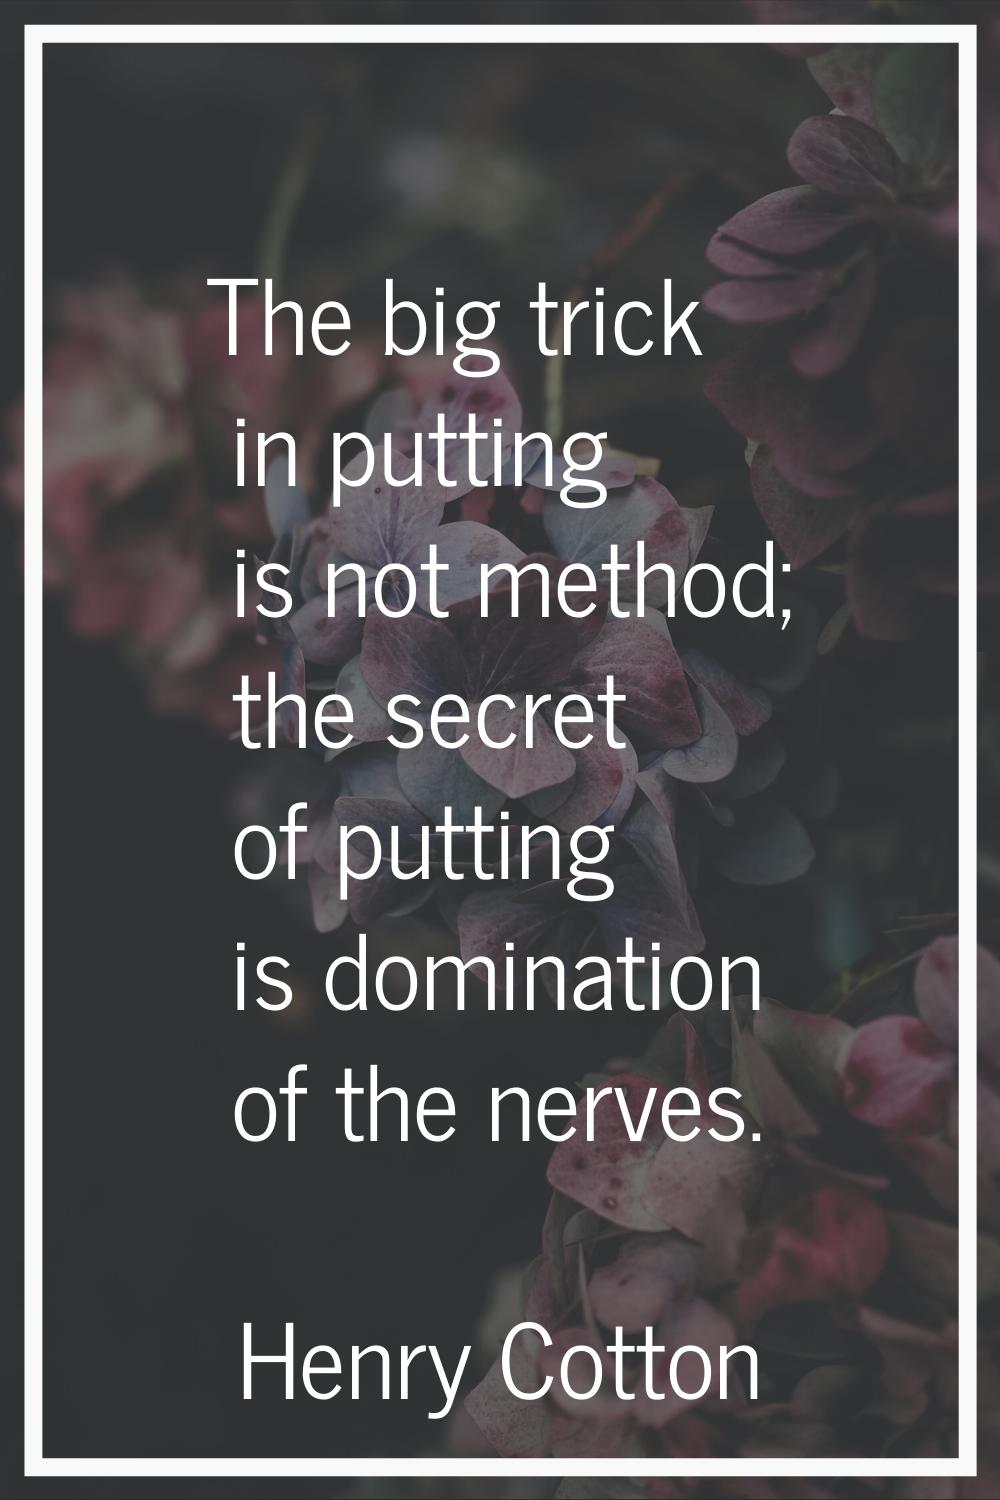 The big trick in putting is not method; the secret of putting is domination of the nerves.